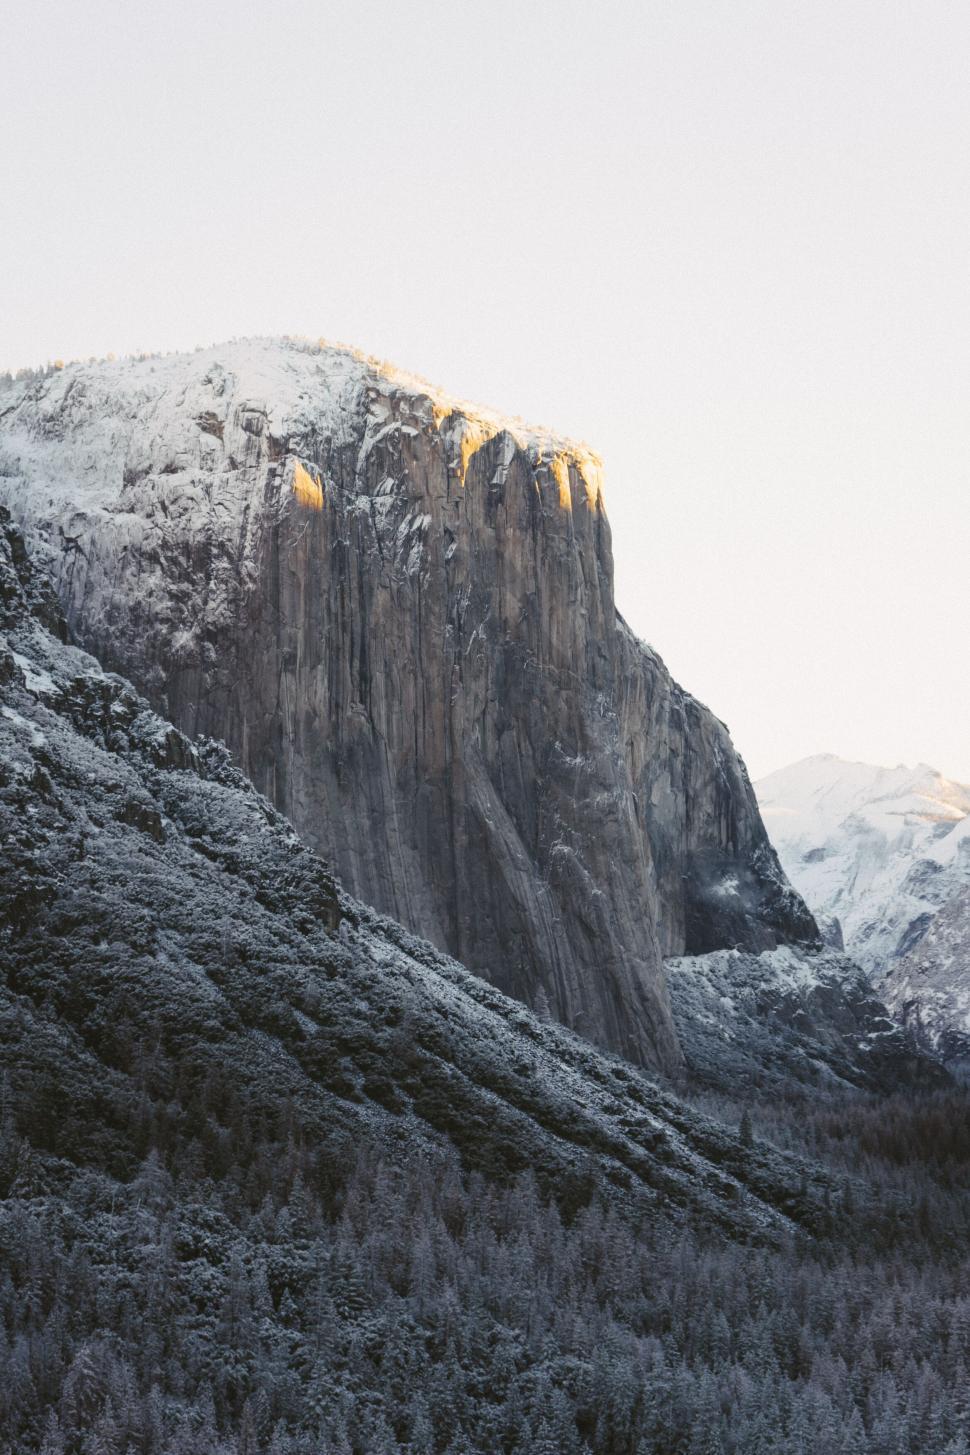 Free Image of Rock face with snow-dusted trees 